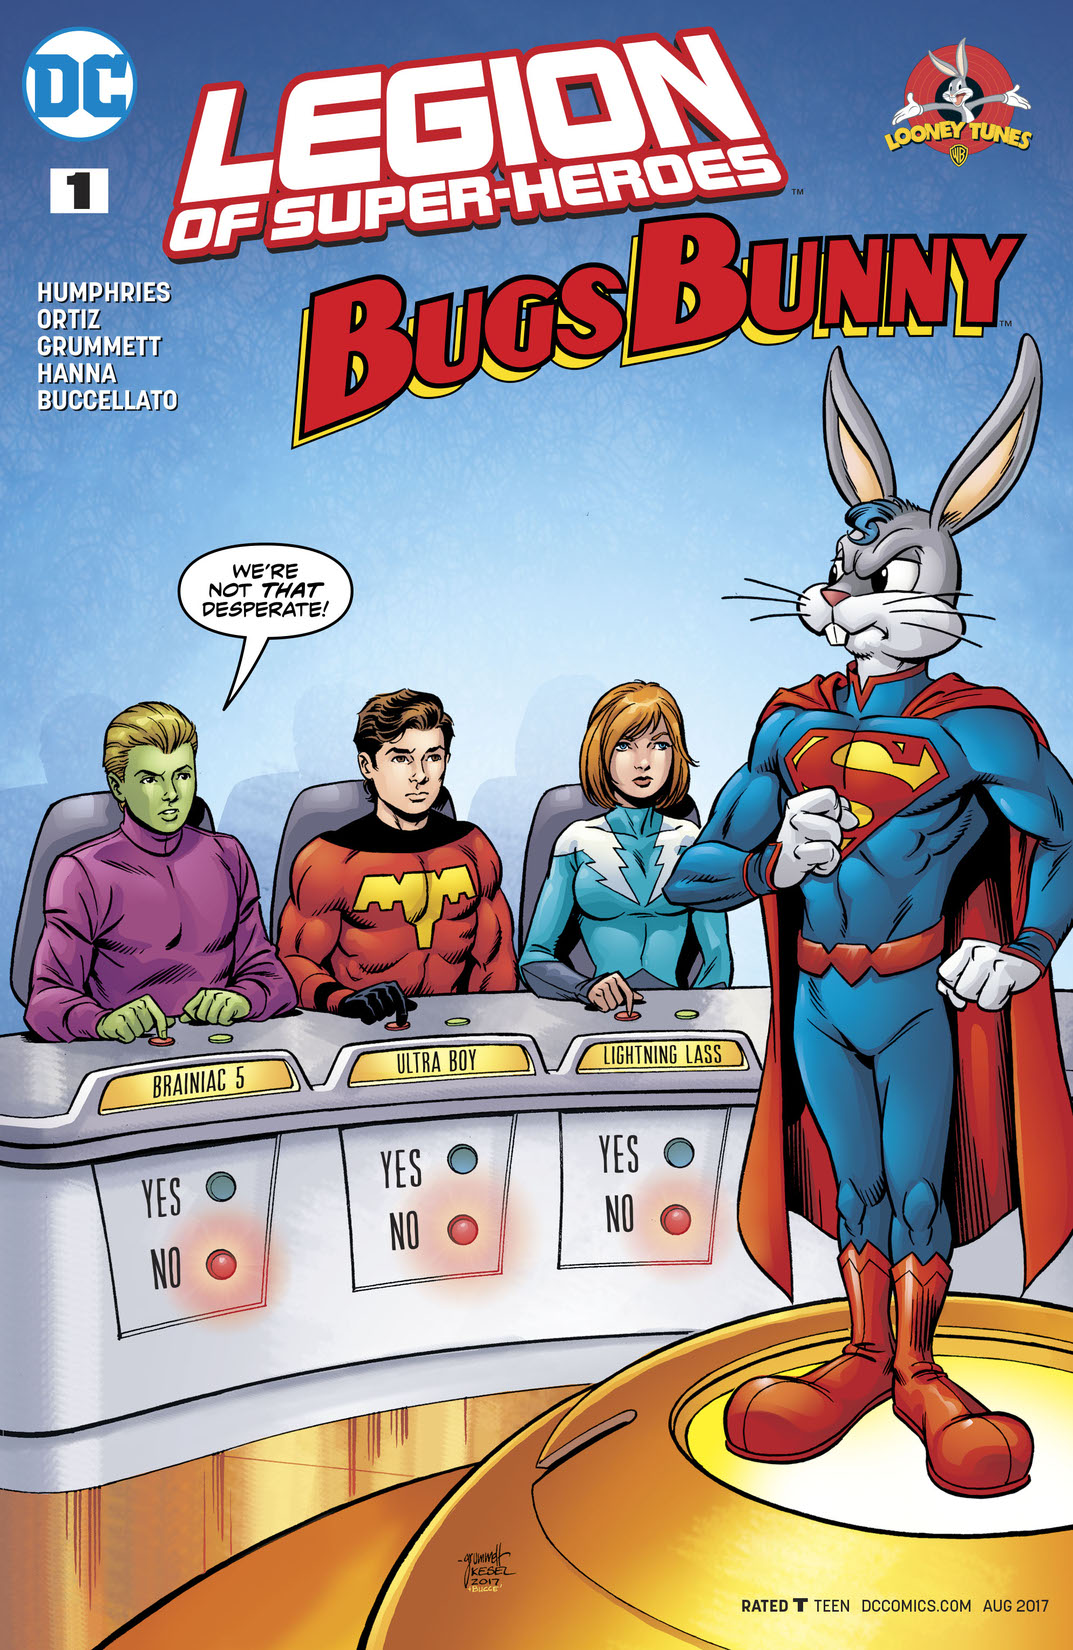 Legion of Super Heroes/Bugs Bunny Special #1 preview images